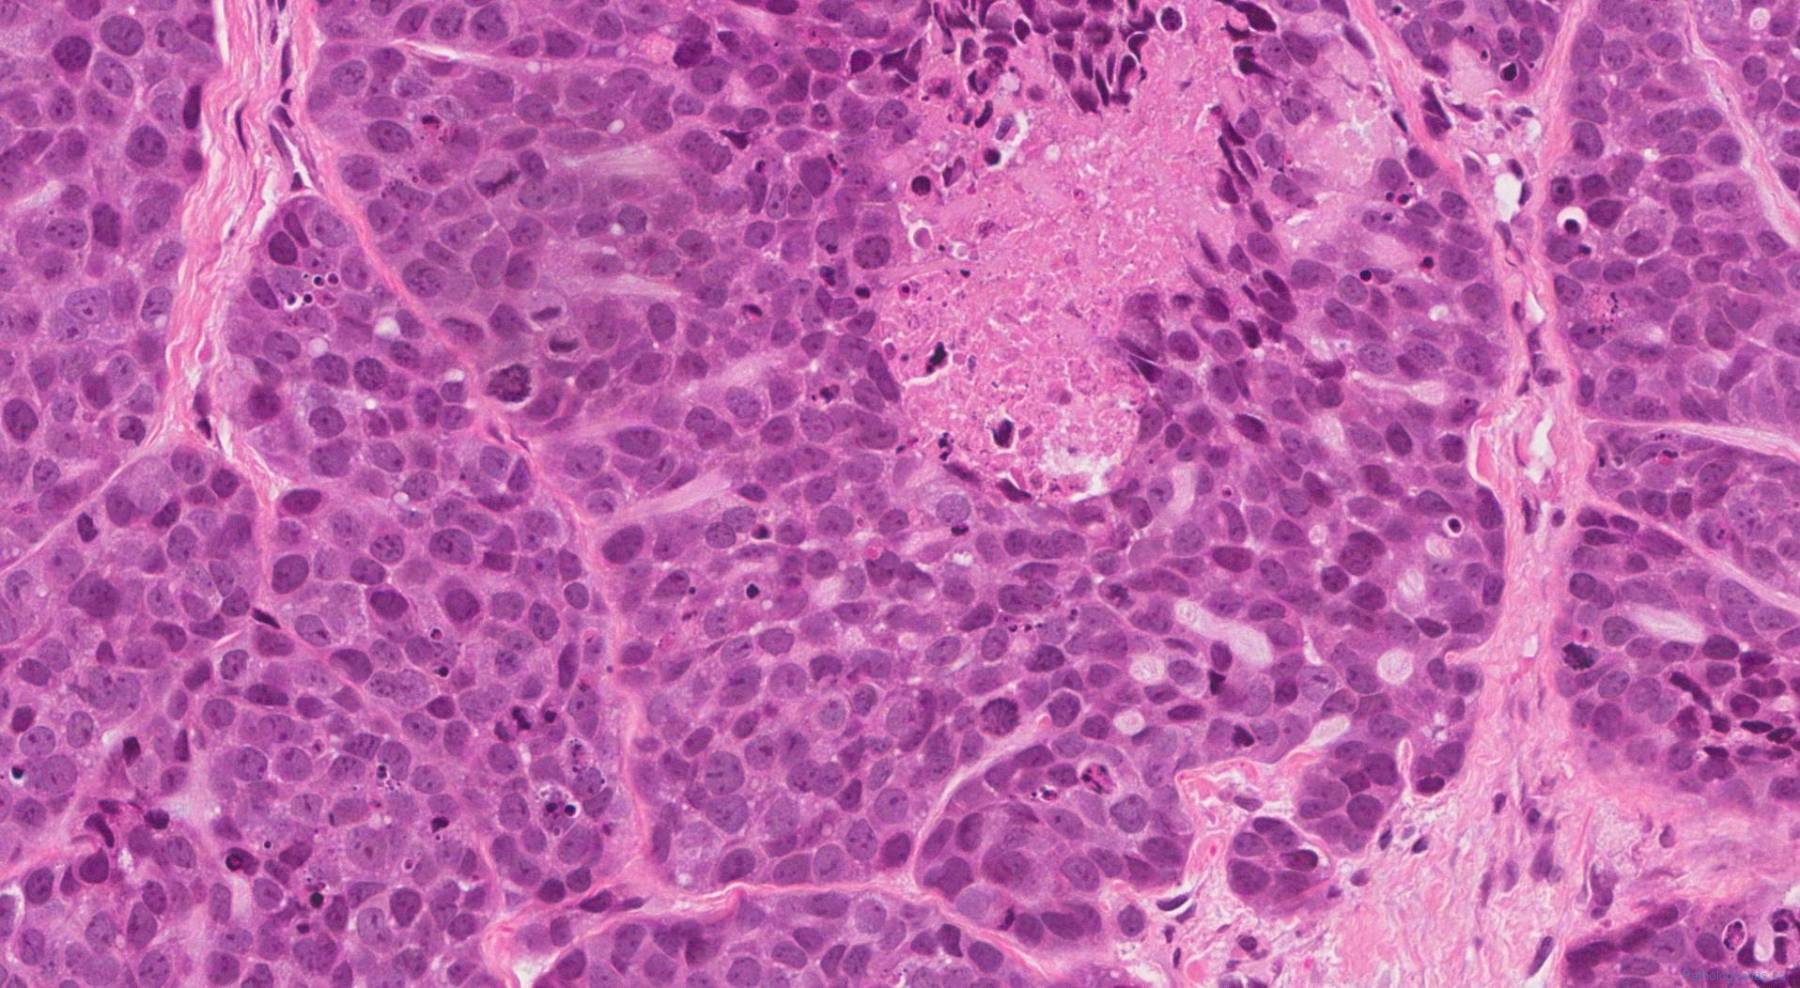 Basaloid squamous cell carcinoma of the larynx | Atlas of Pathology